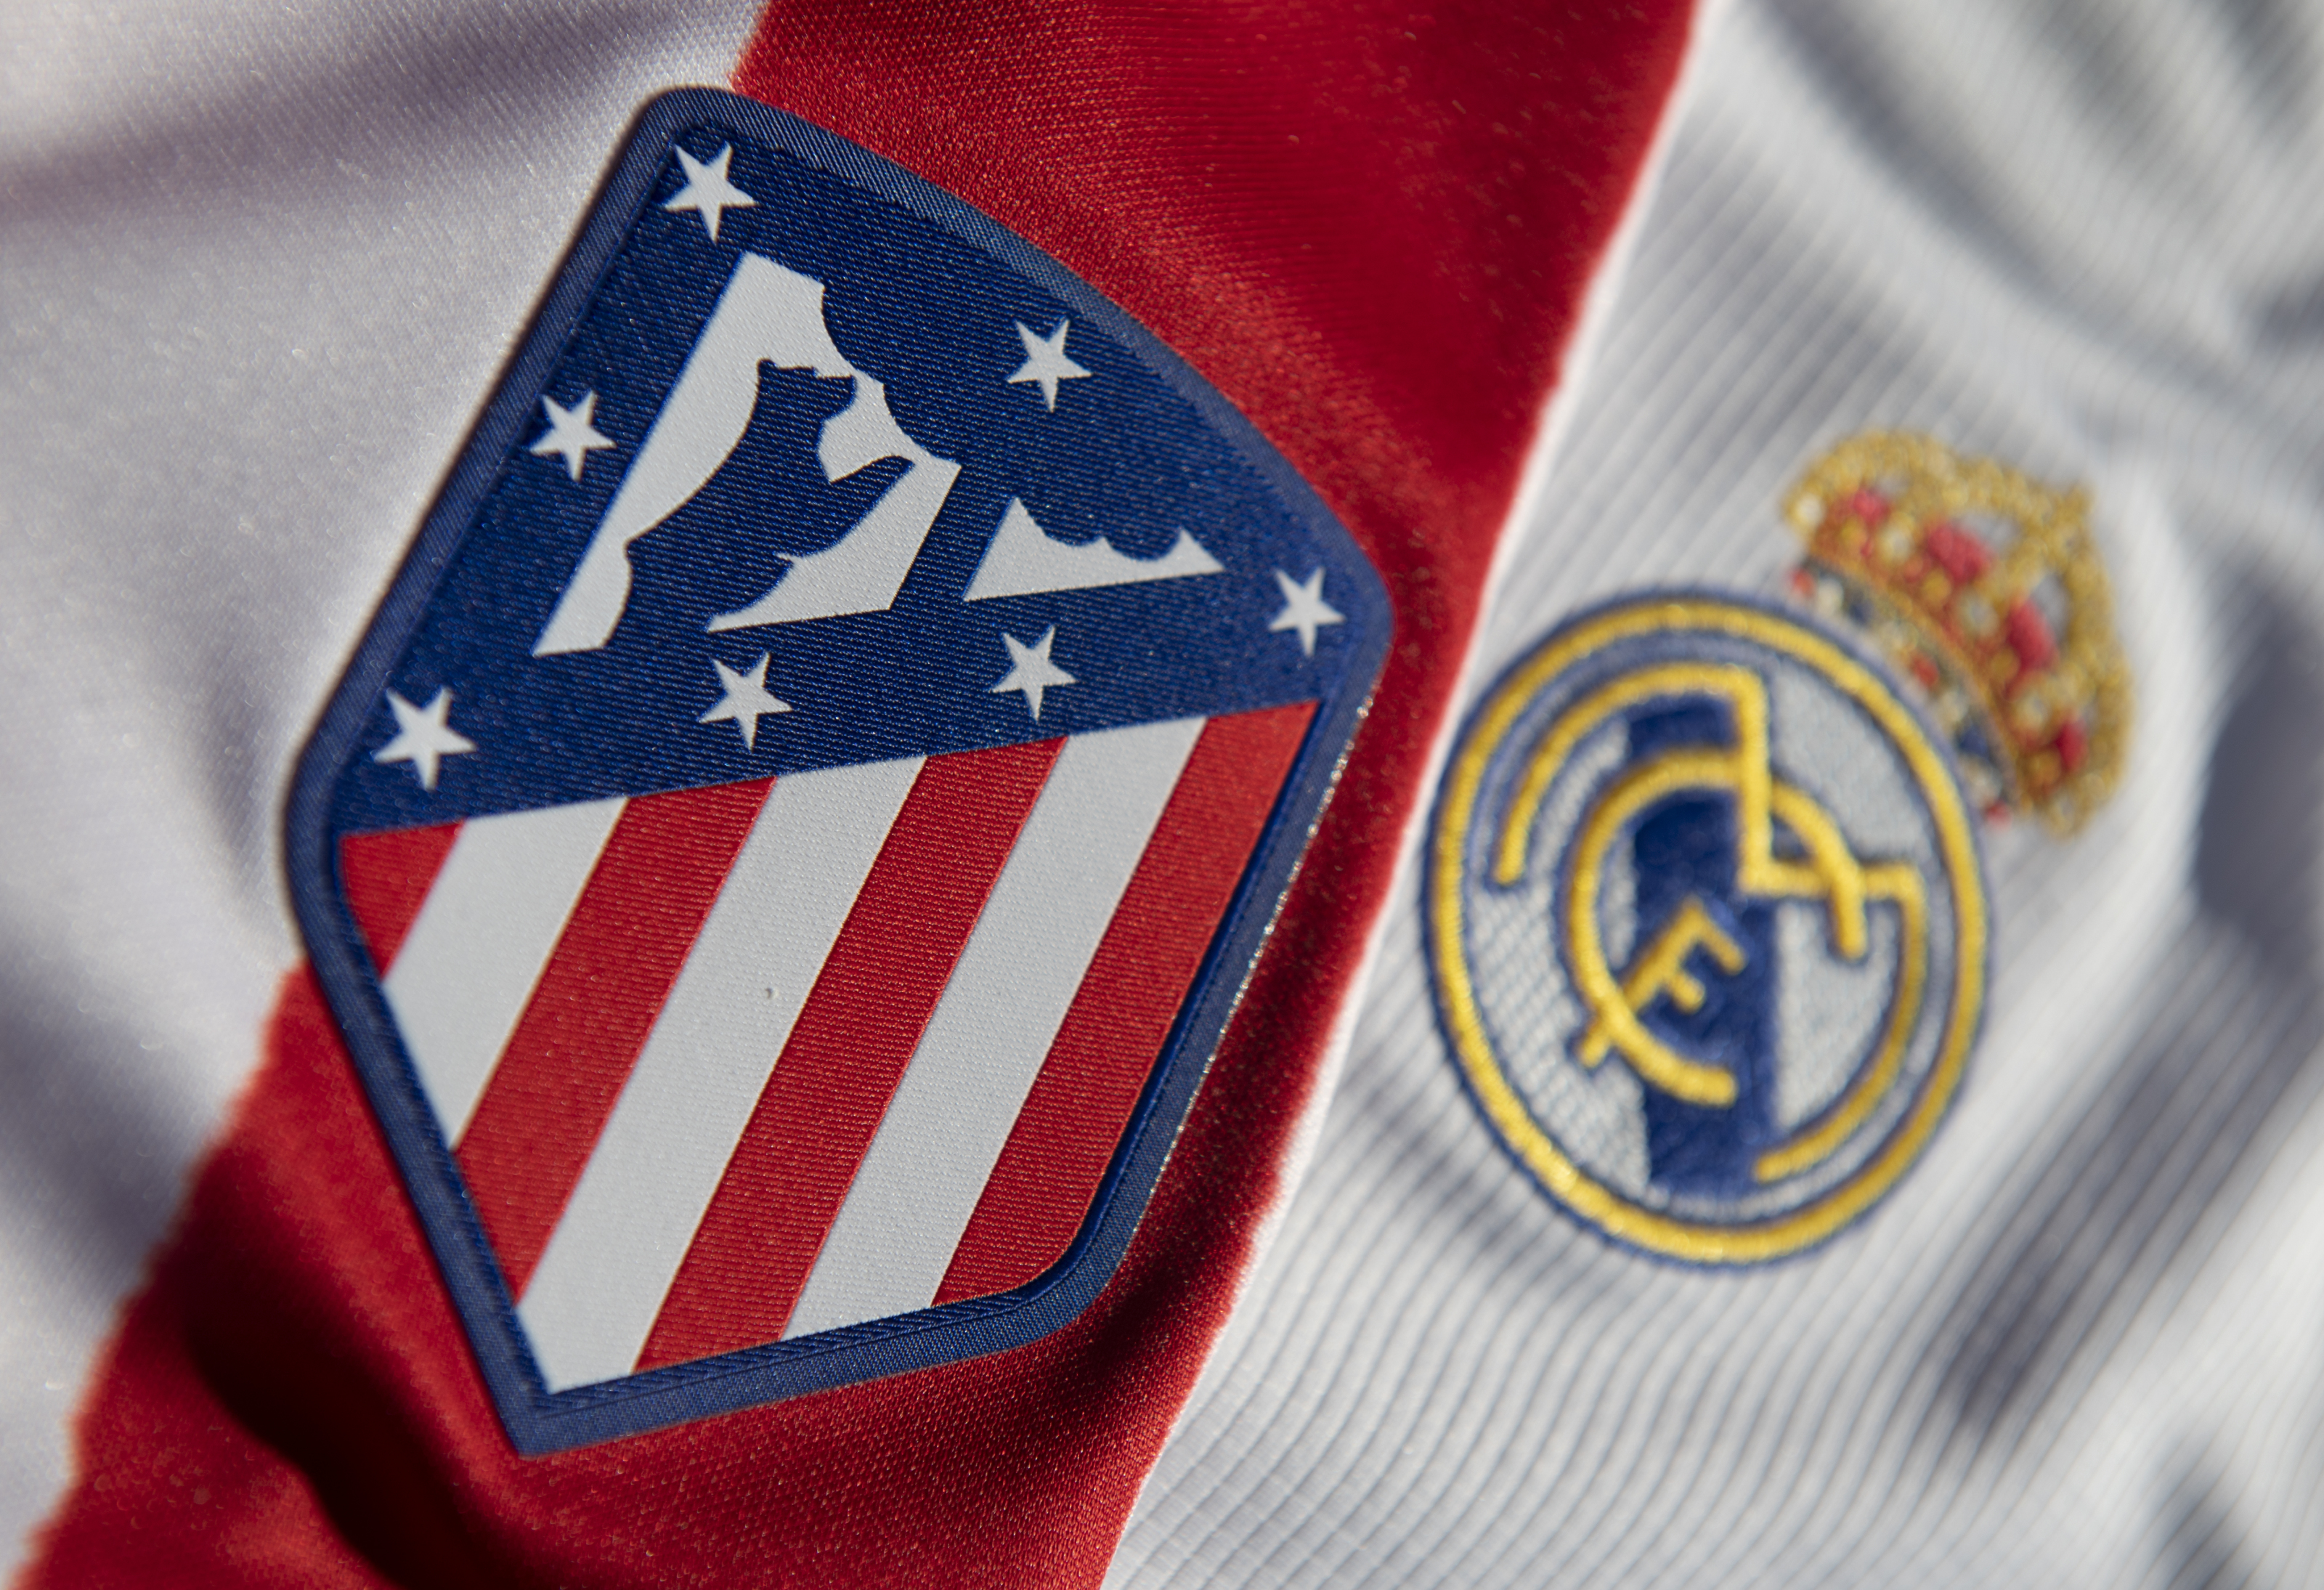 Atletico Madrid vs Real Madrid LIVE: La Liga winners Real look to shake Atletico's Top 4 hopes in 229th MADRID DERBY, Follow Atletico vs Real Madrid LIVE: Team news, predictions